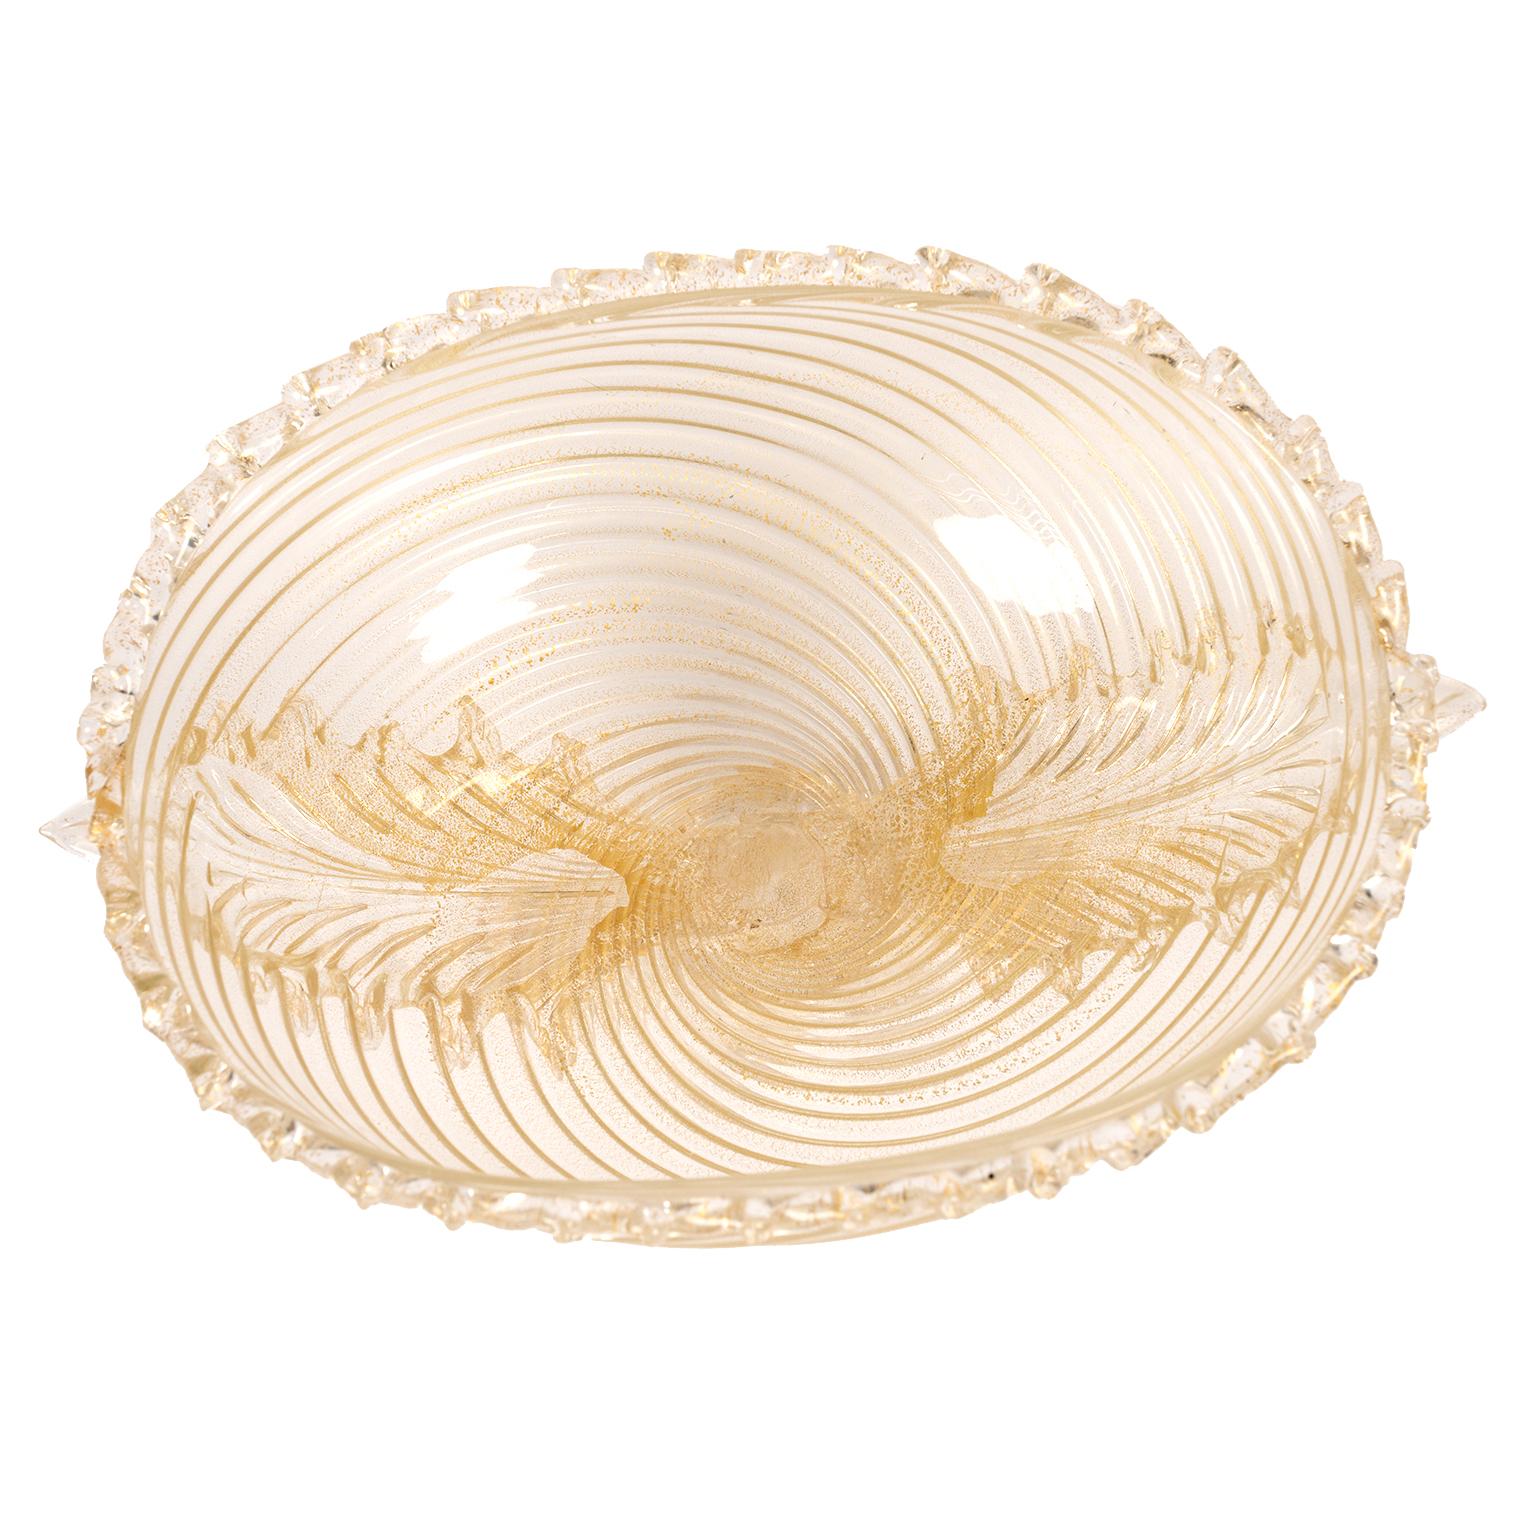 Mid-20th Century Barovier Toso Gold Glass Footed Bowl